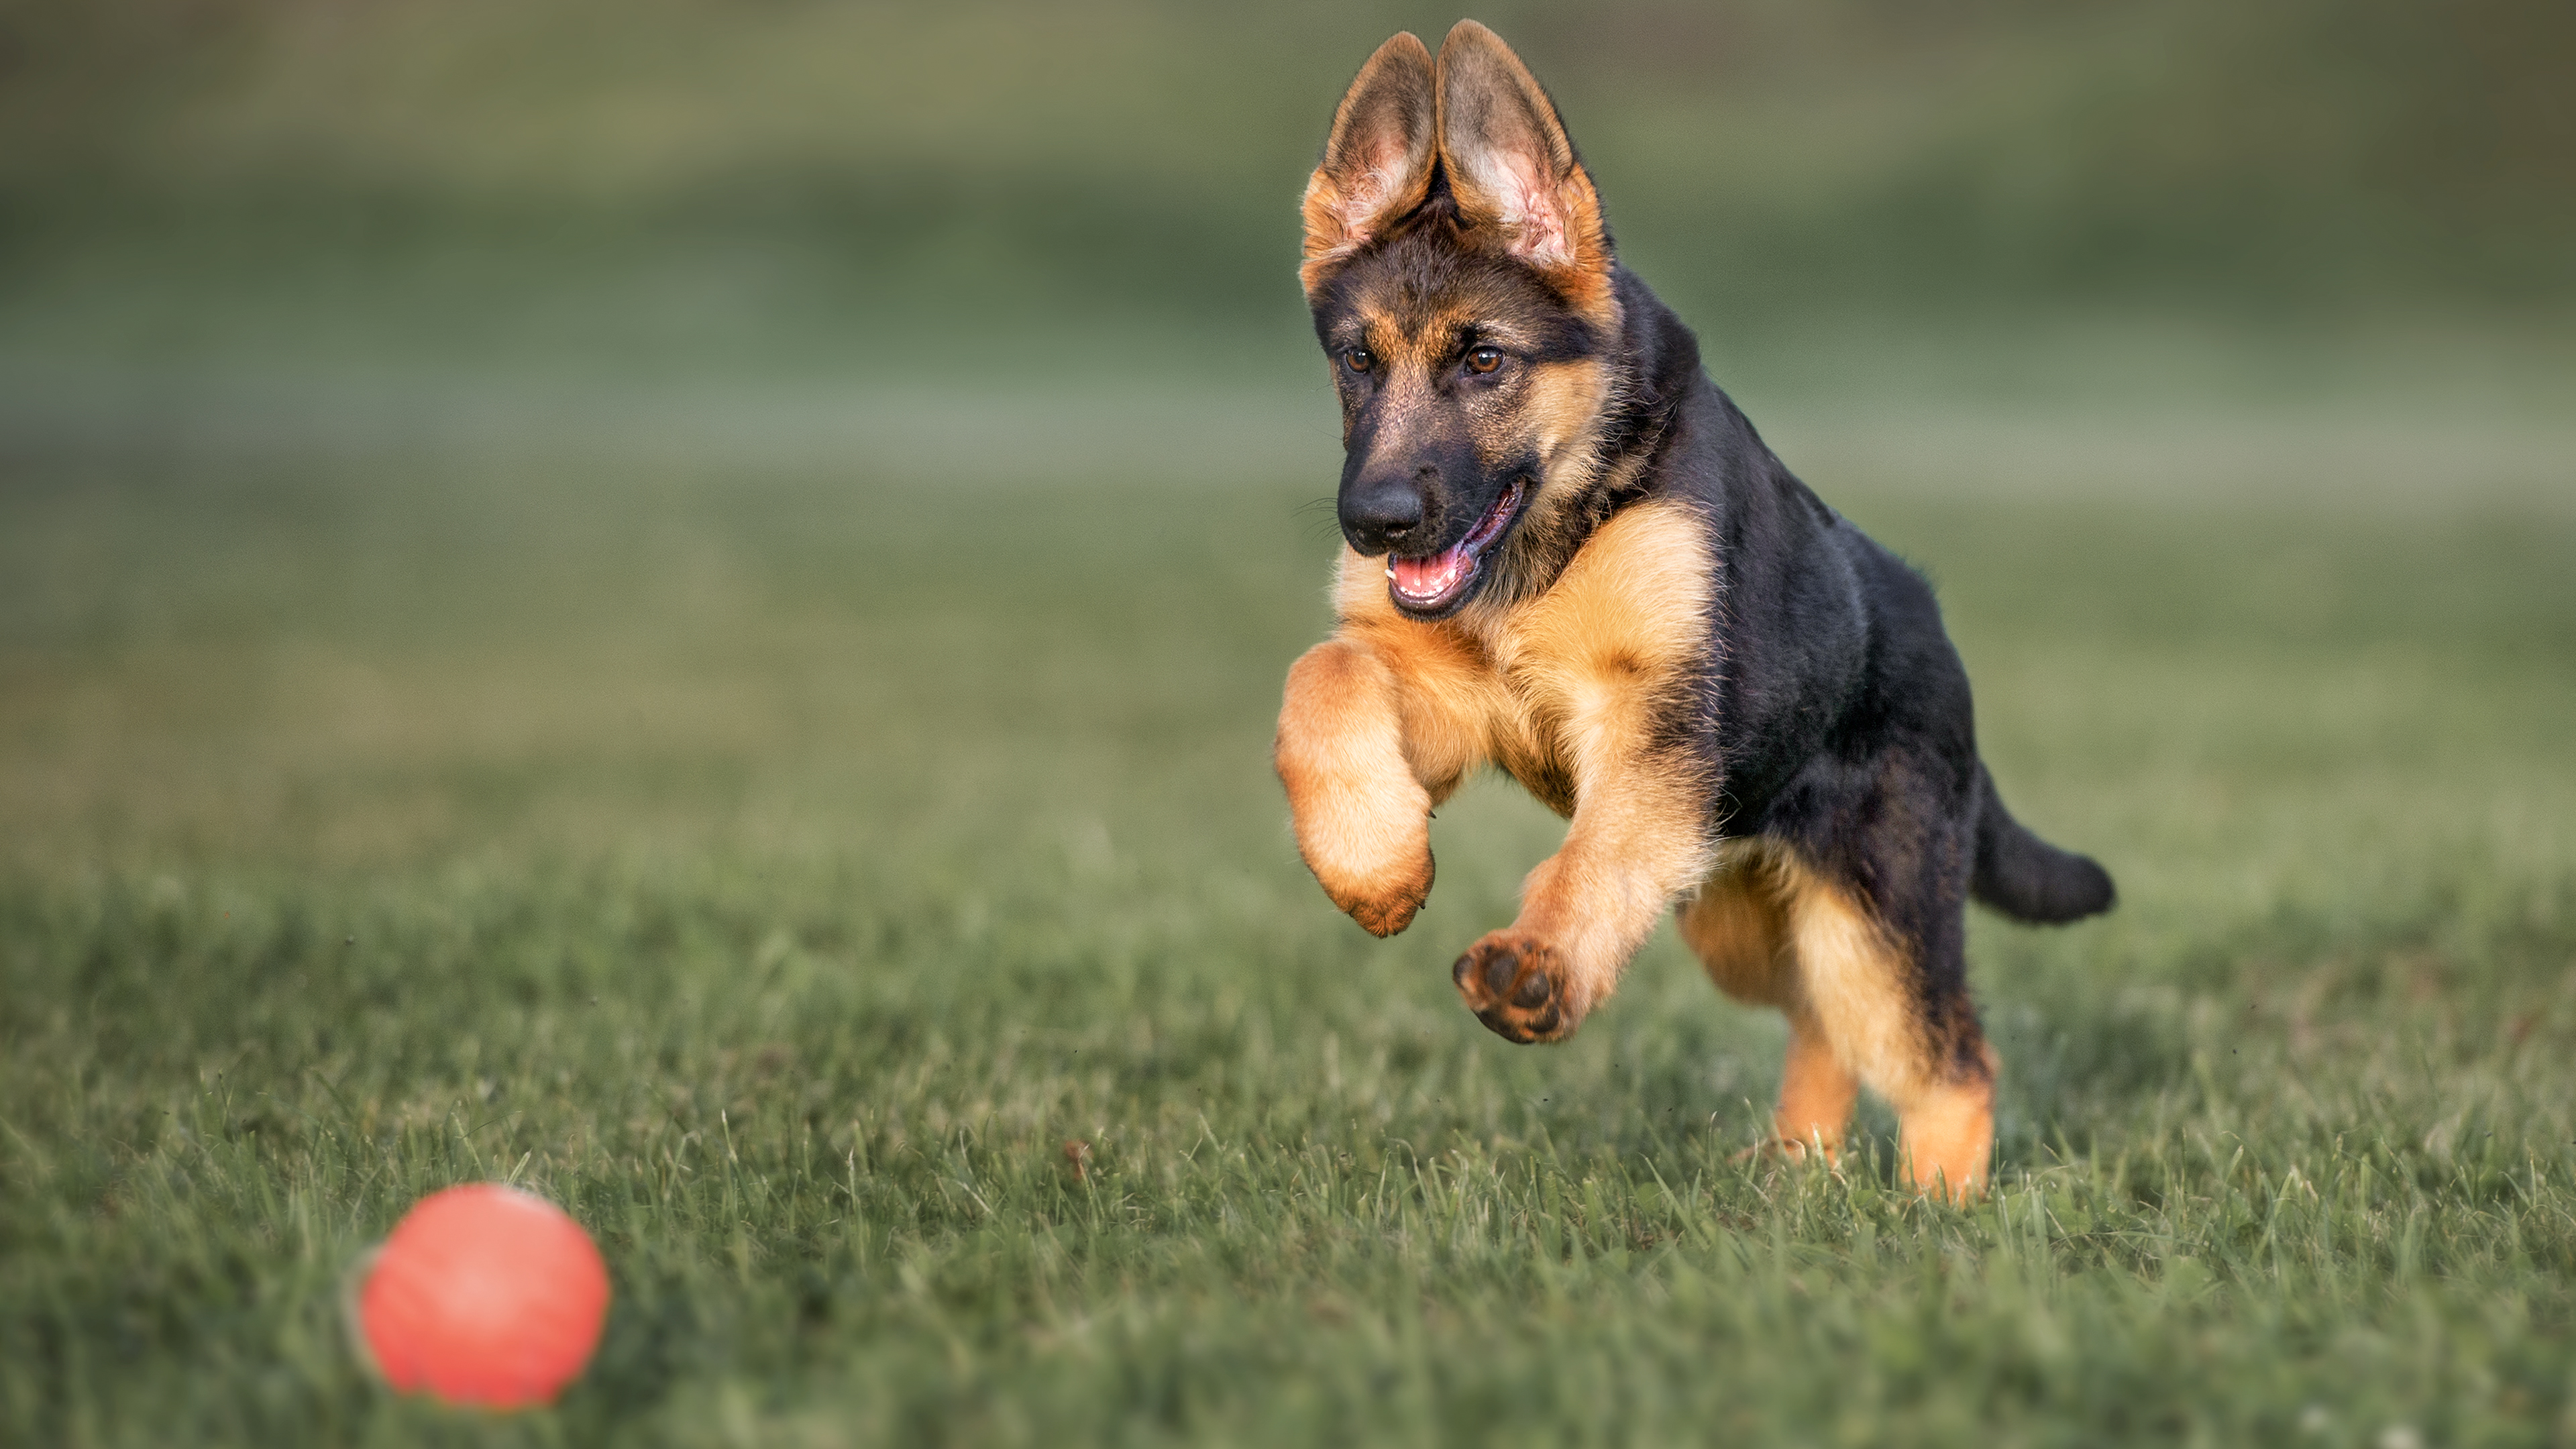 German Shepherd puppy chasing after a ball outdoors